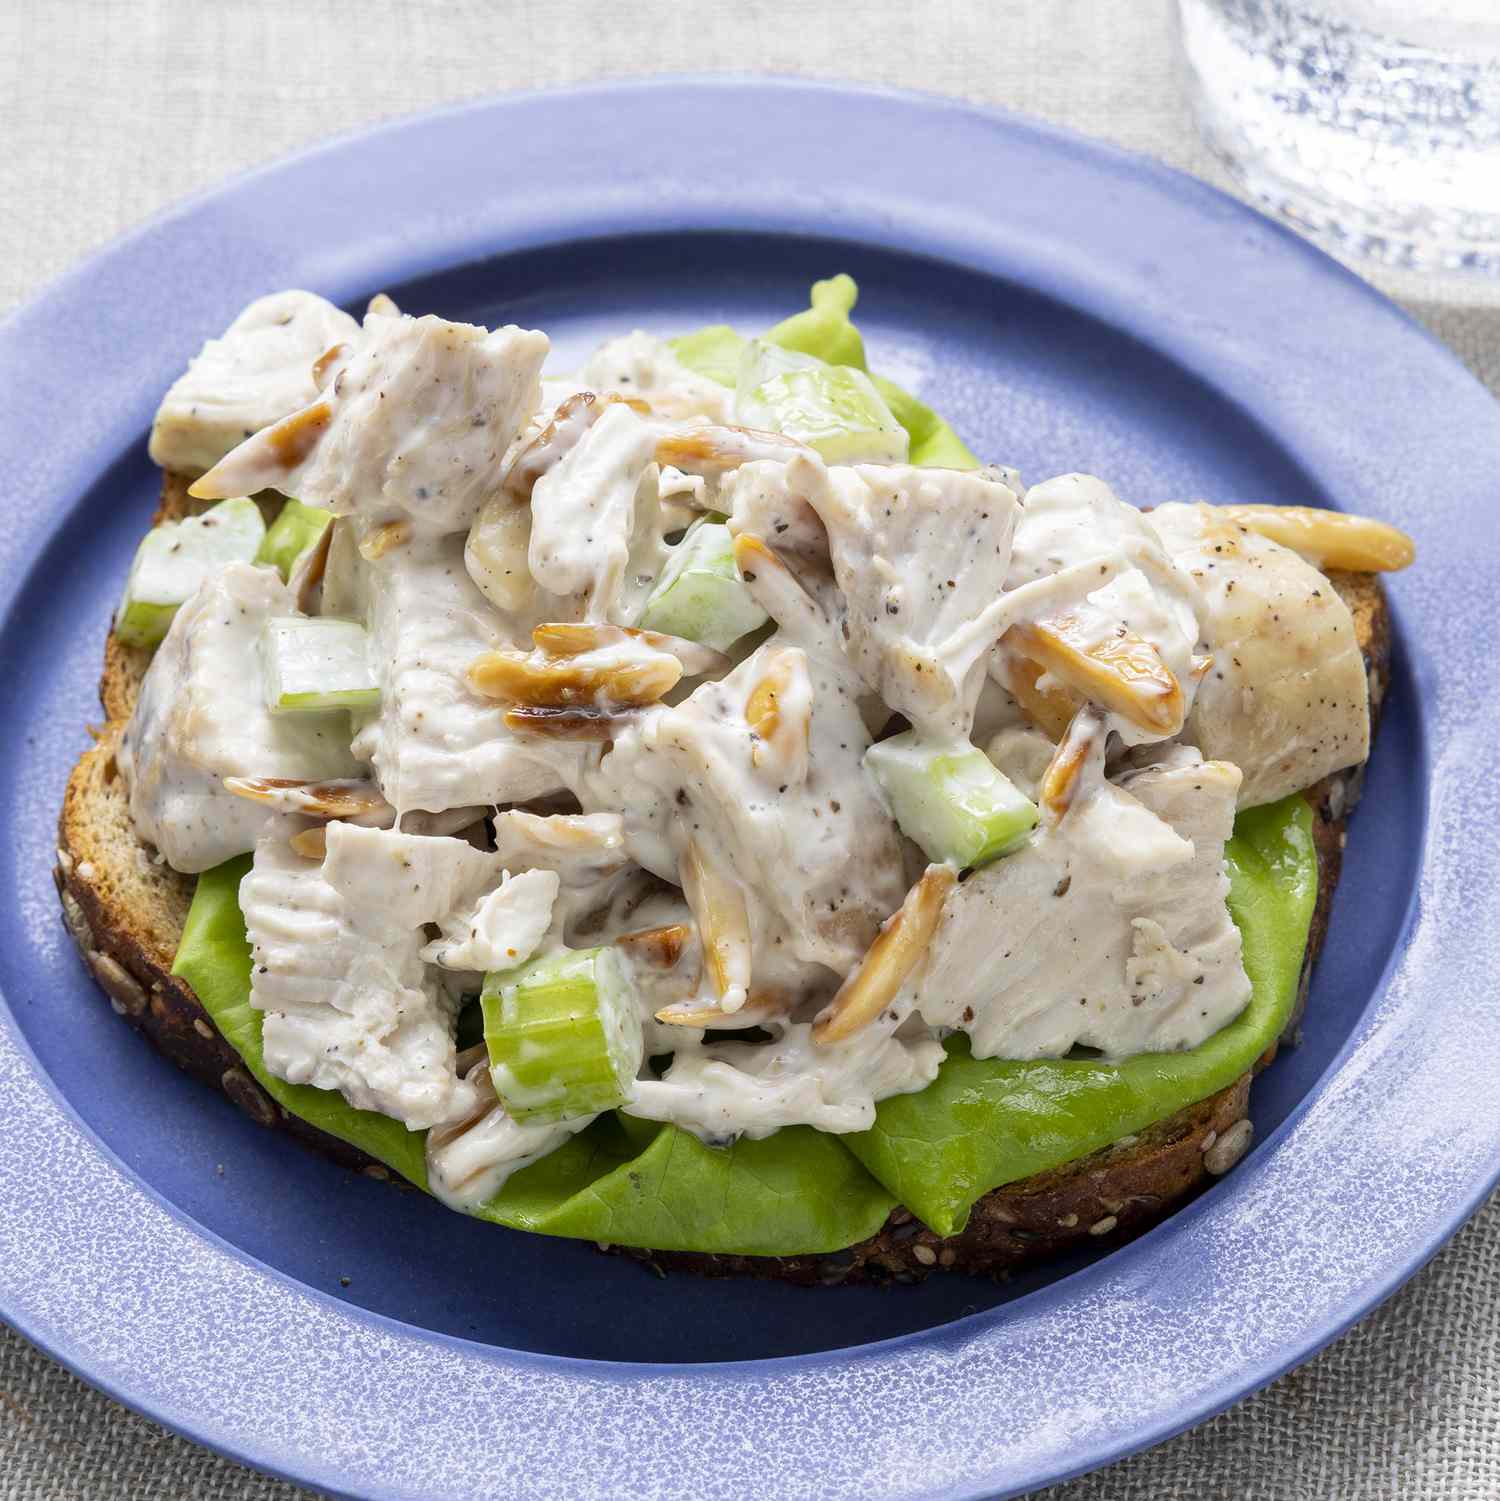 a close up view of basic chicken salad served open faced on a piece of bread with lettuce